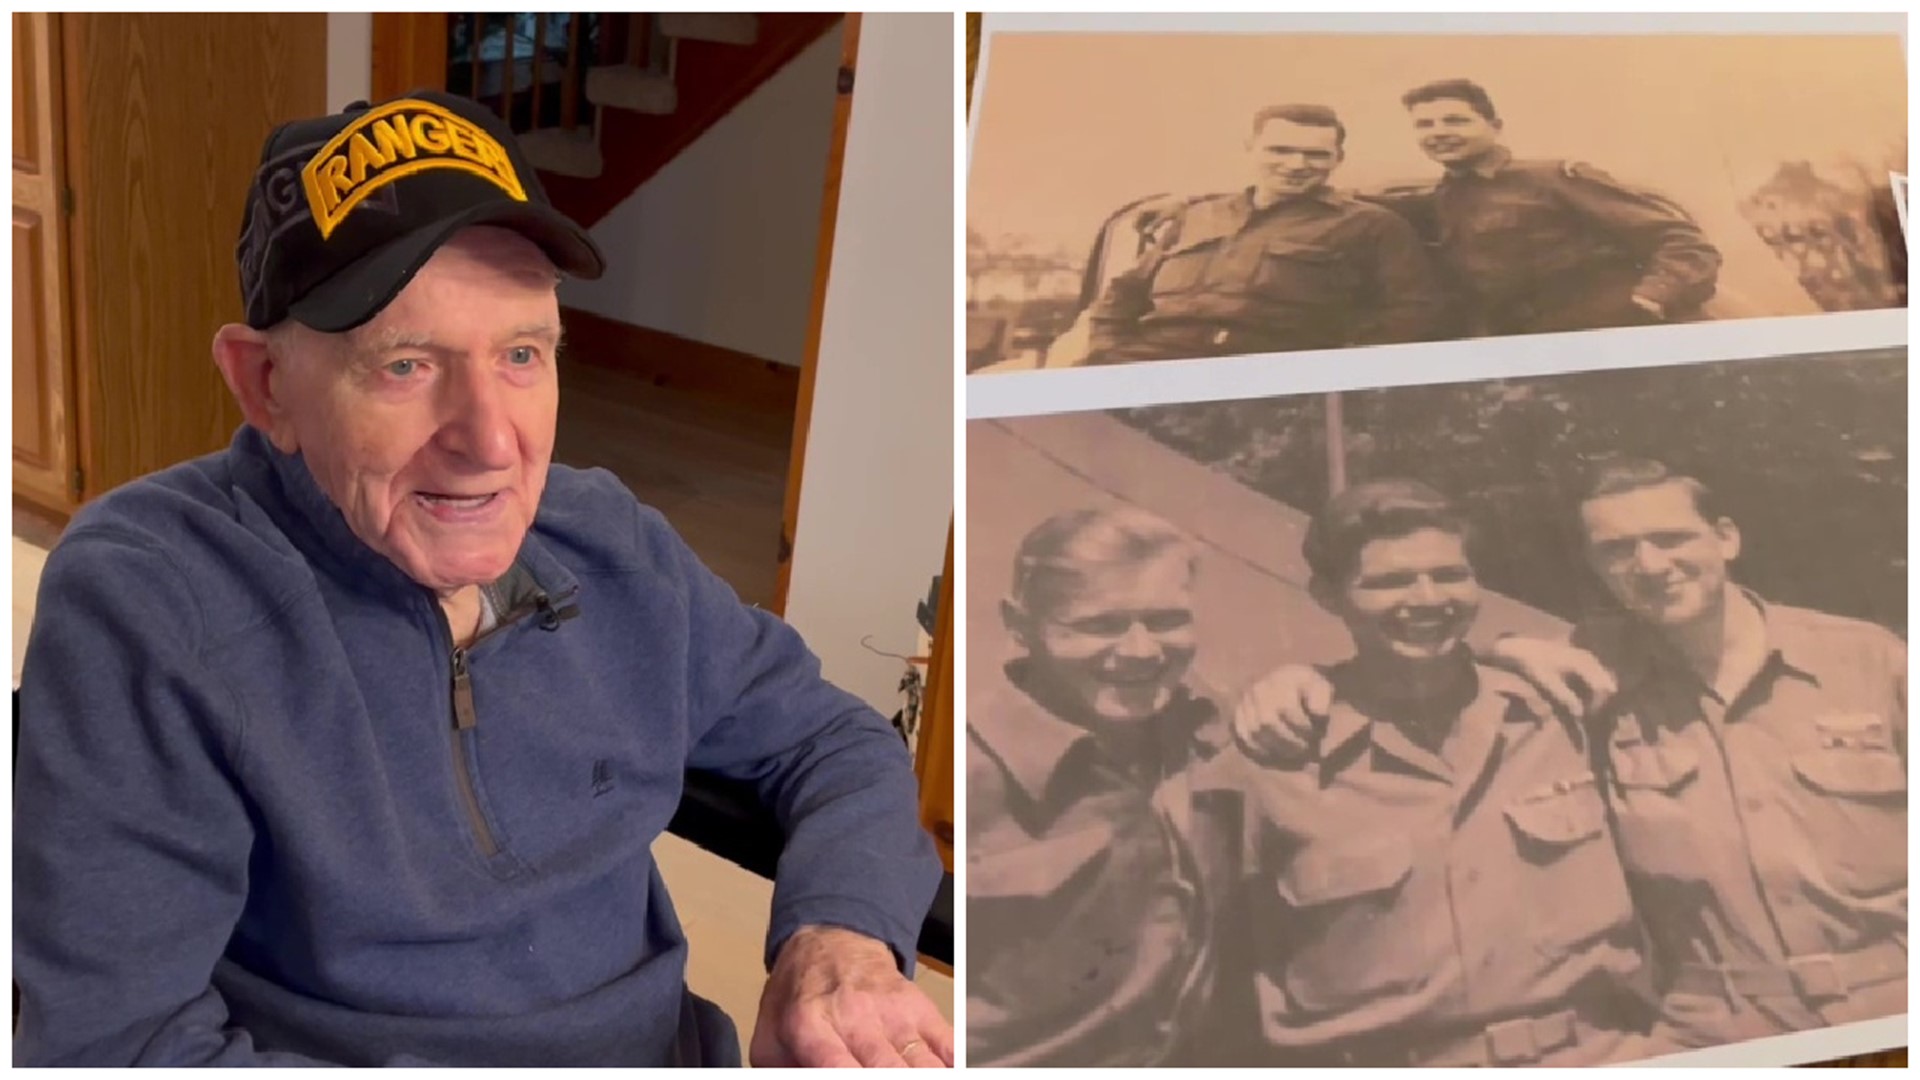 A World War II veteran from our area is getting a special honor from Congress and is still sharing his vivid memories of the war.